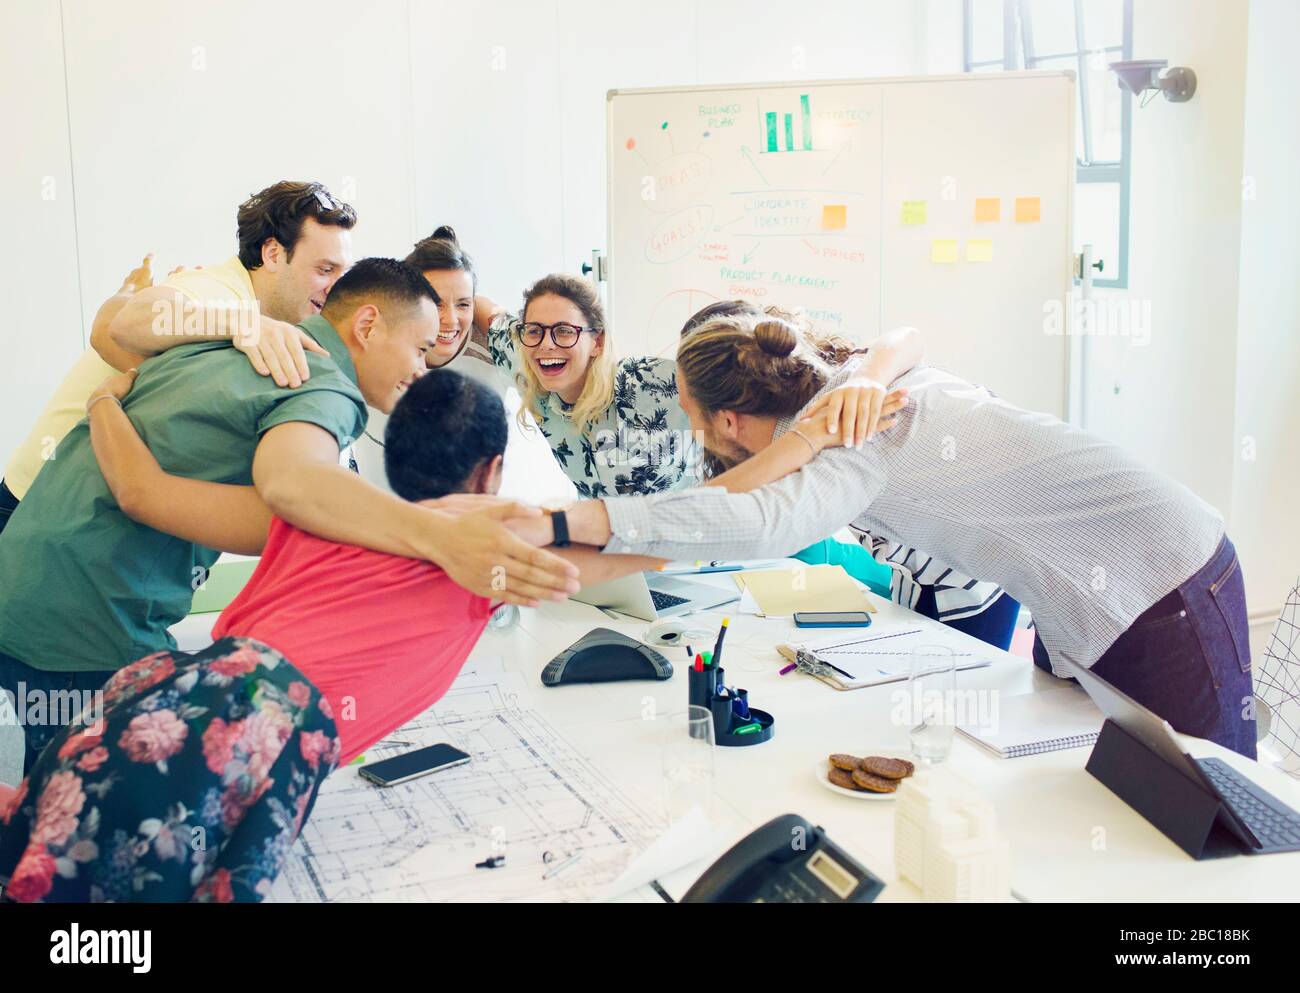 Enthusiastic architects bonding in huddle in conference room meeting Stock Photo